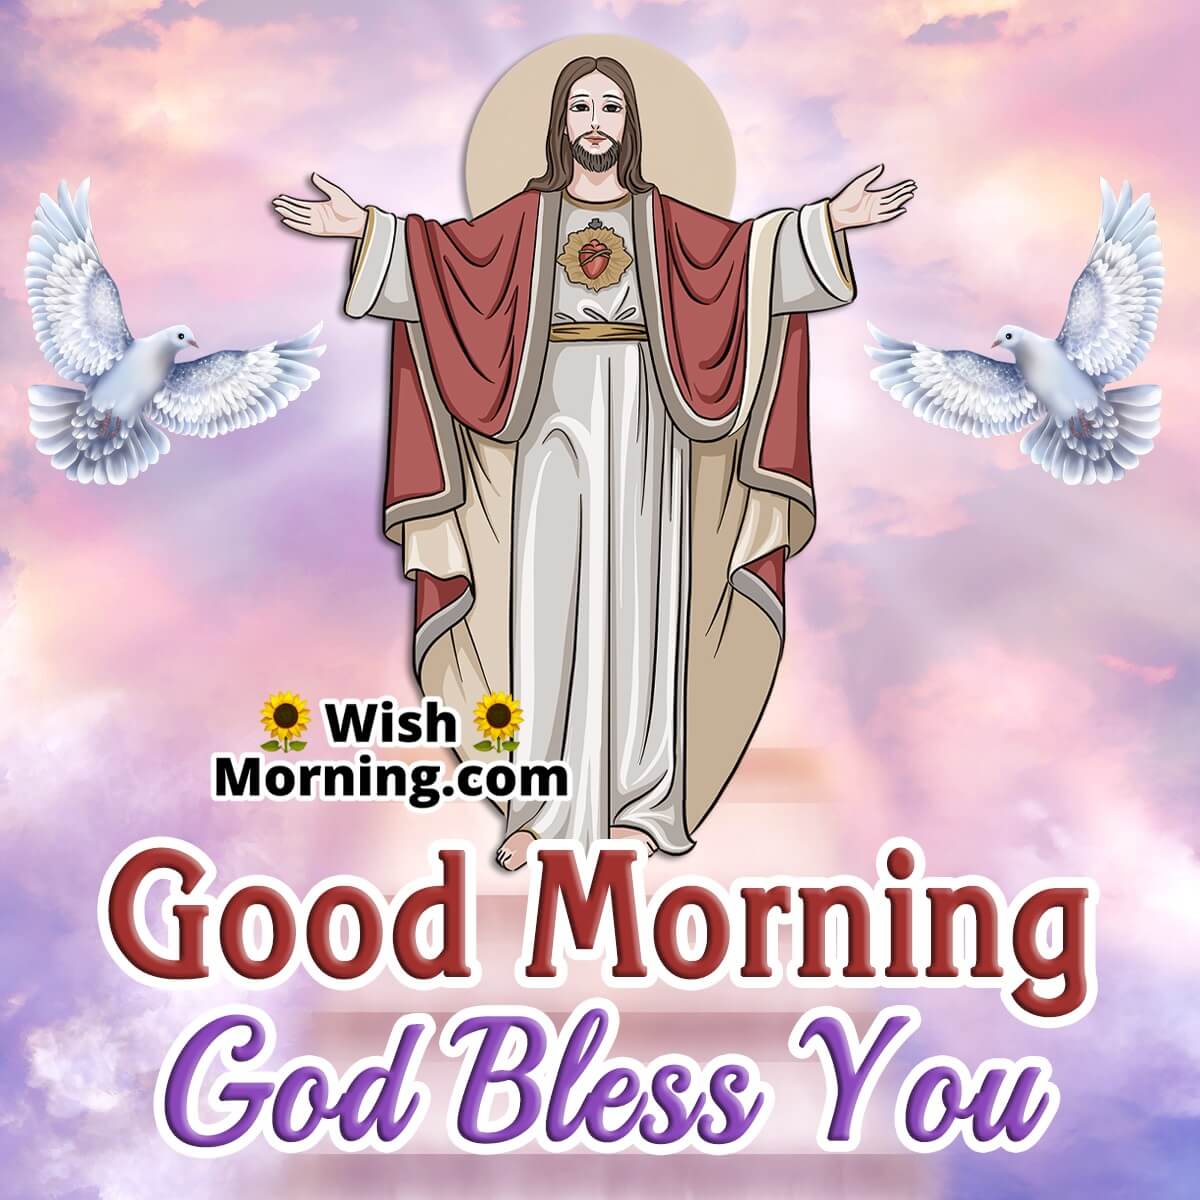 Collection of Amazing Full 4K Good Morning Jesus Images – 999+ Top Picks